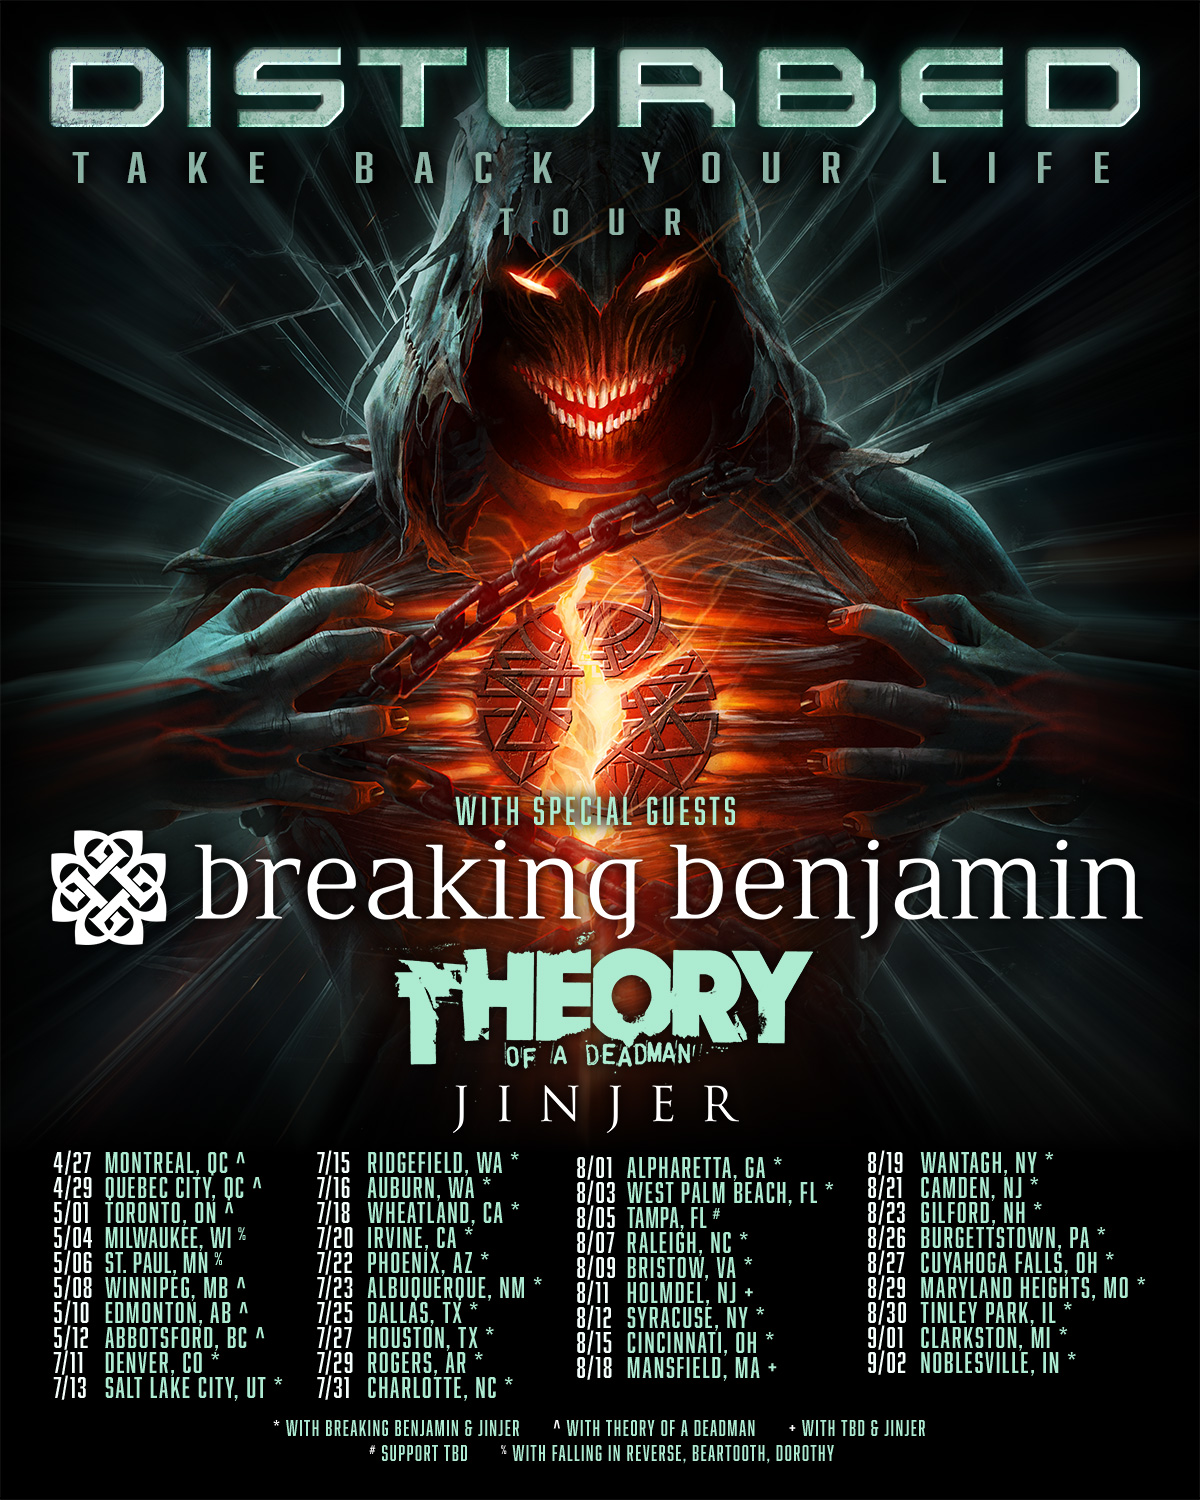 Disturbed invades Noblesville for the “Take Back your Life tour” with Breaking Benjamin & Jinjer